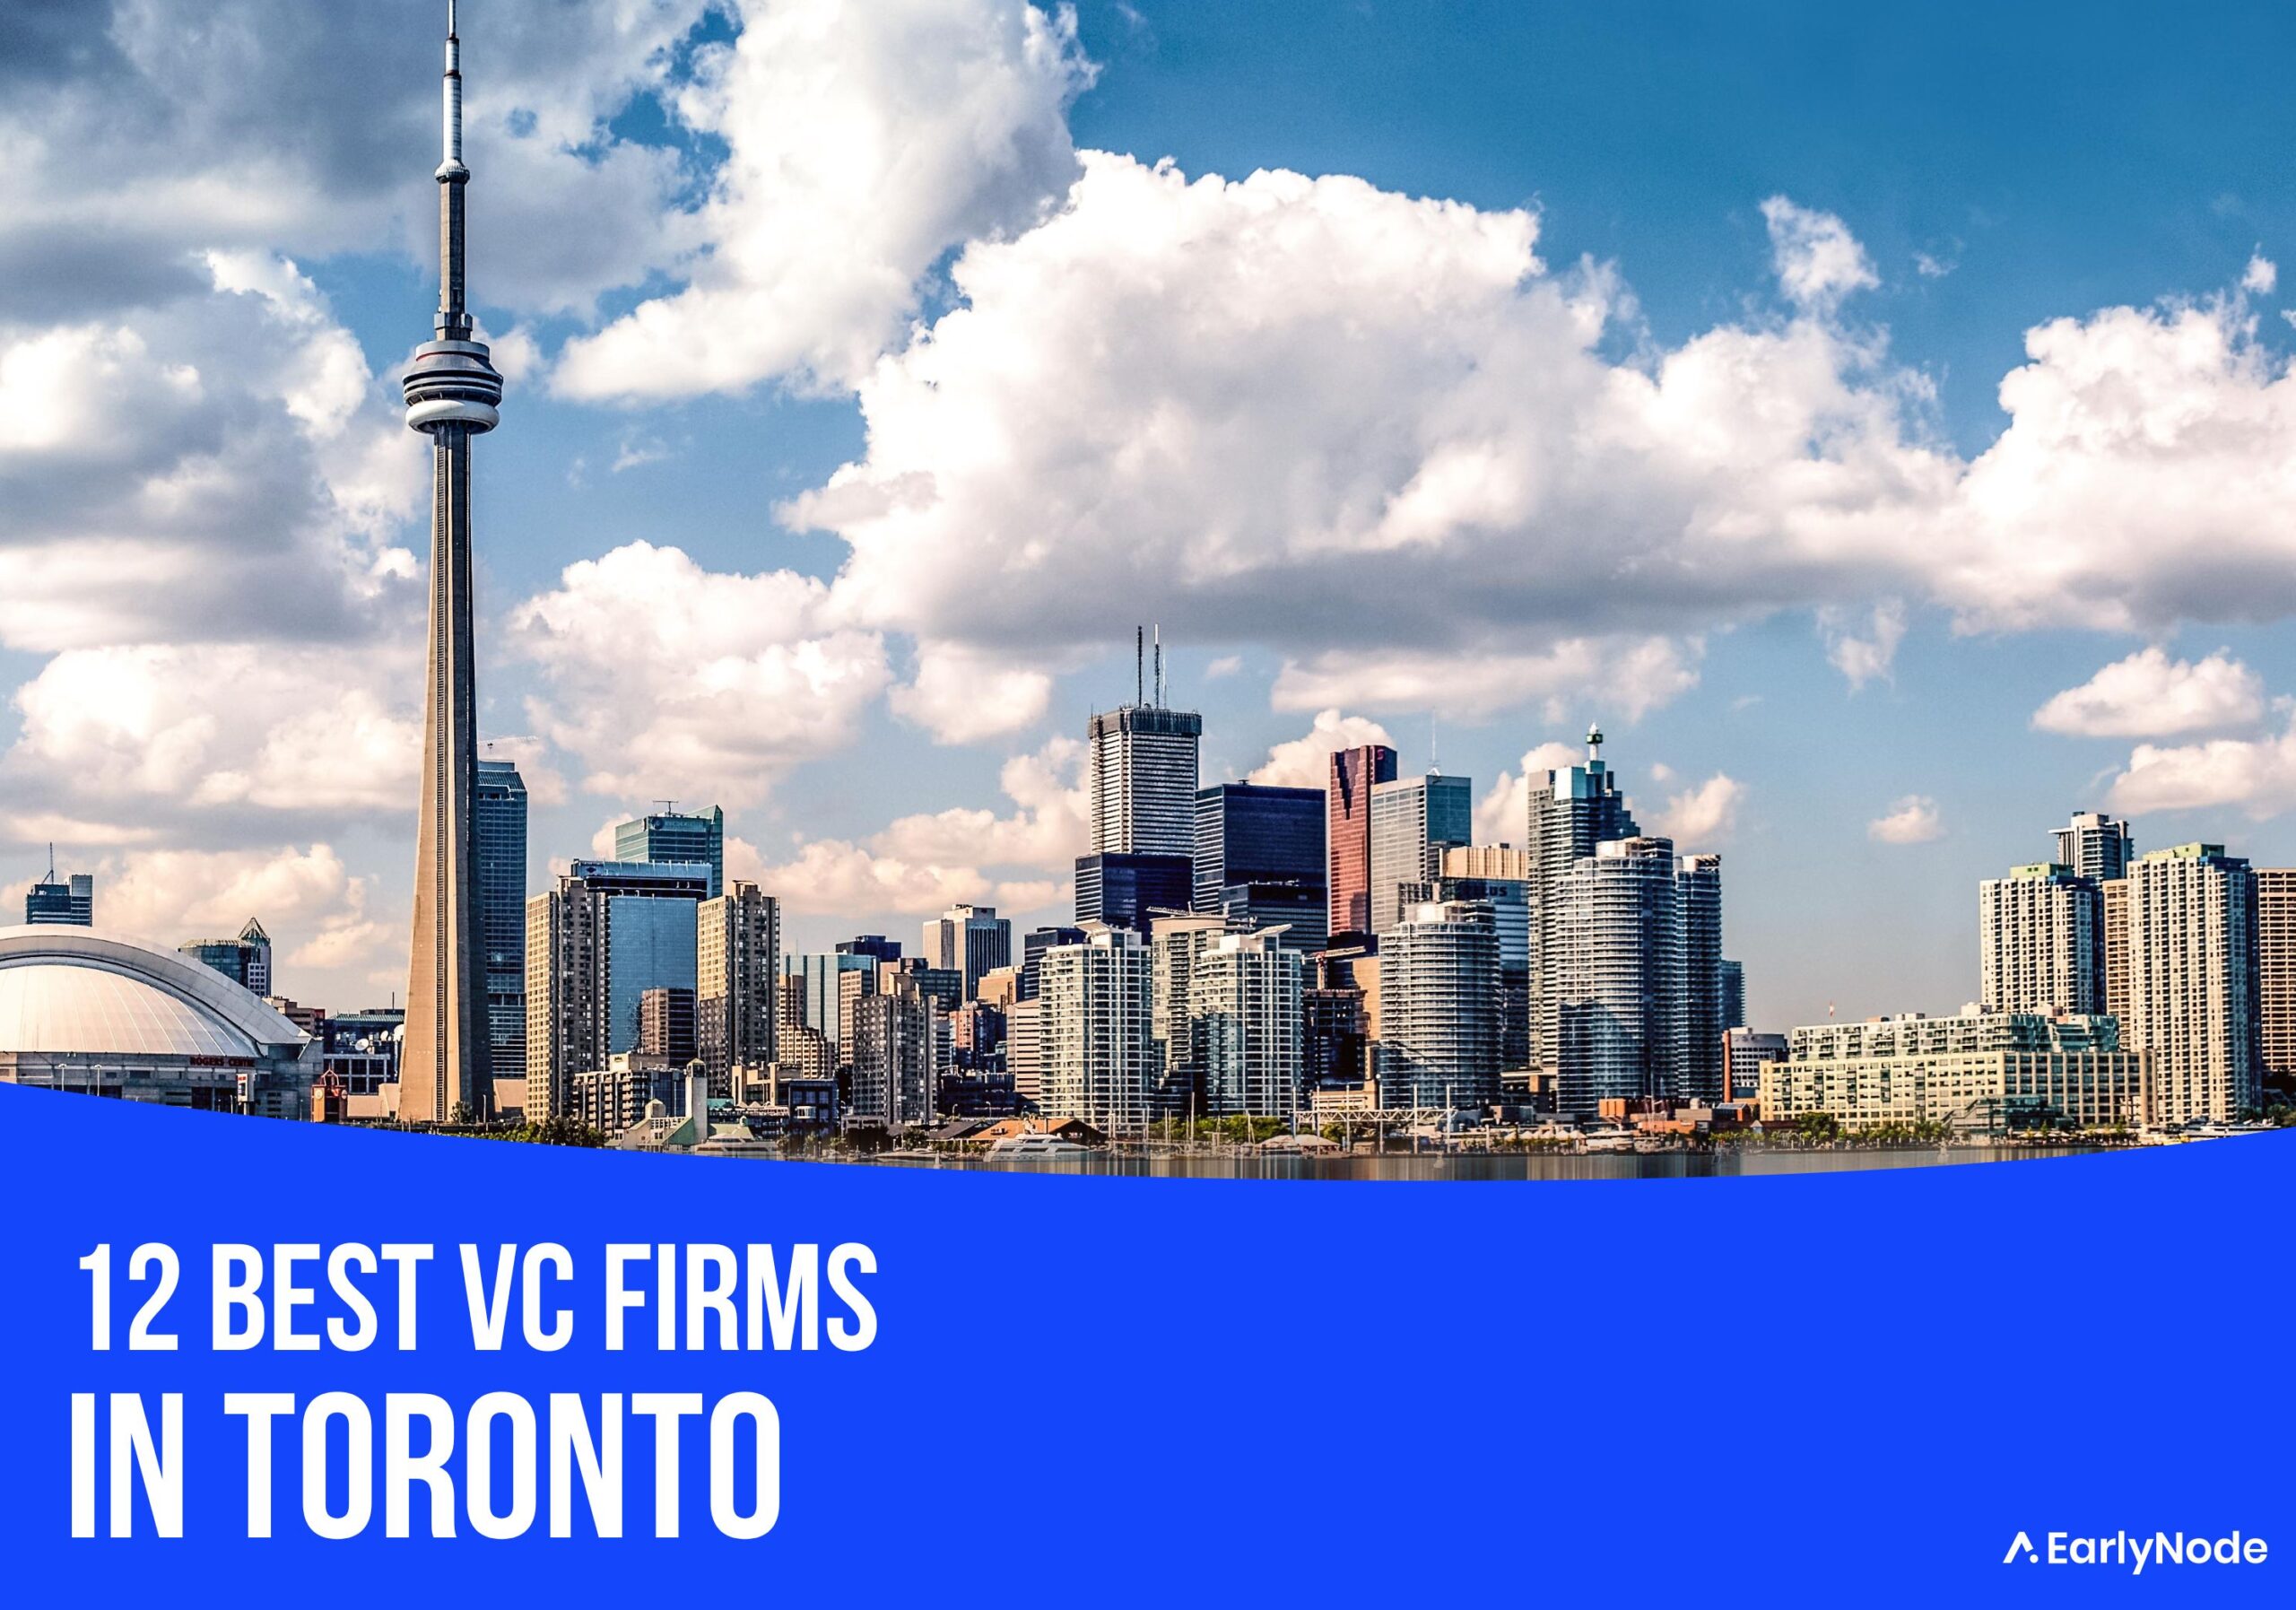 12 Best Venture Capital (VC) Firms In Toronto